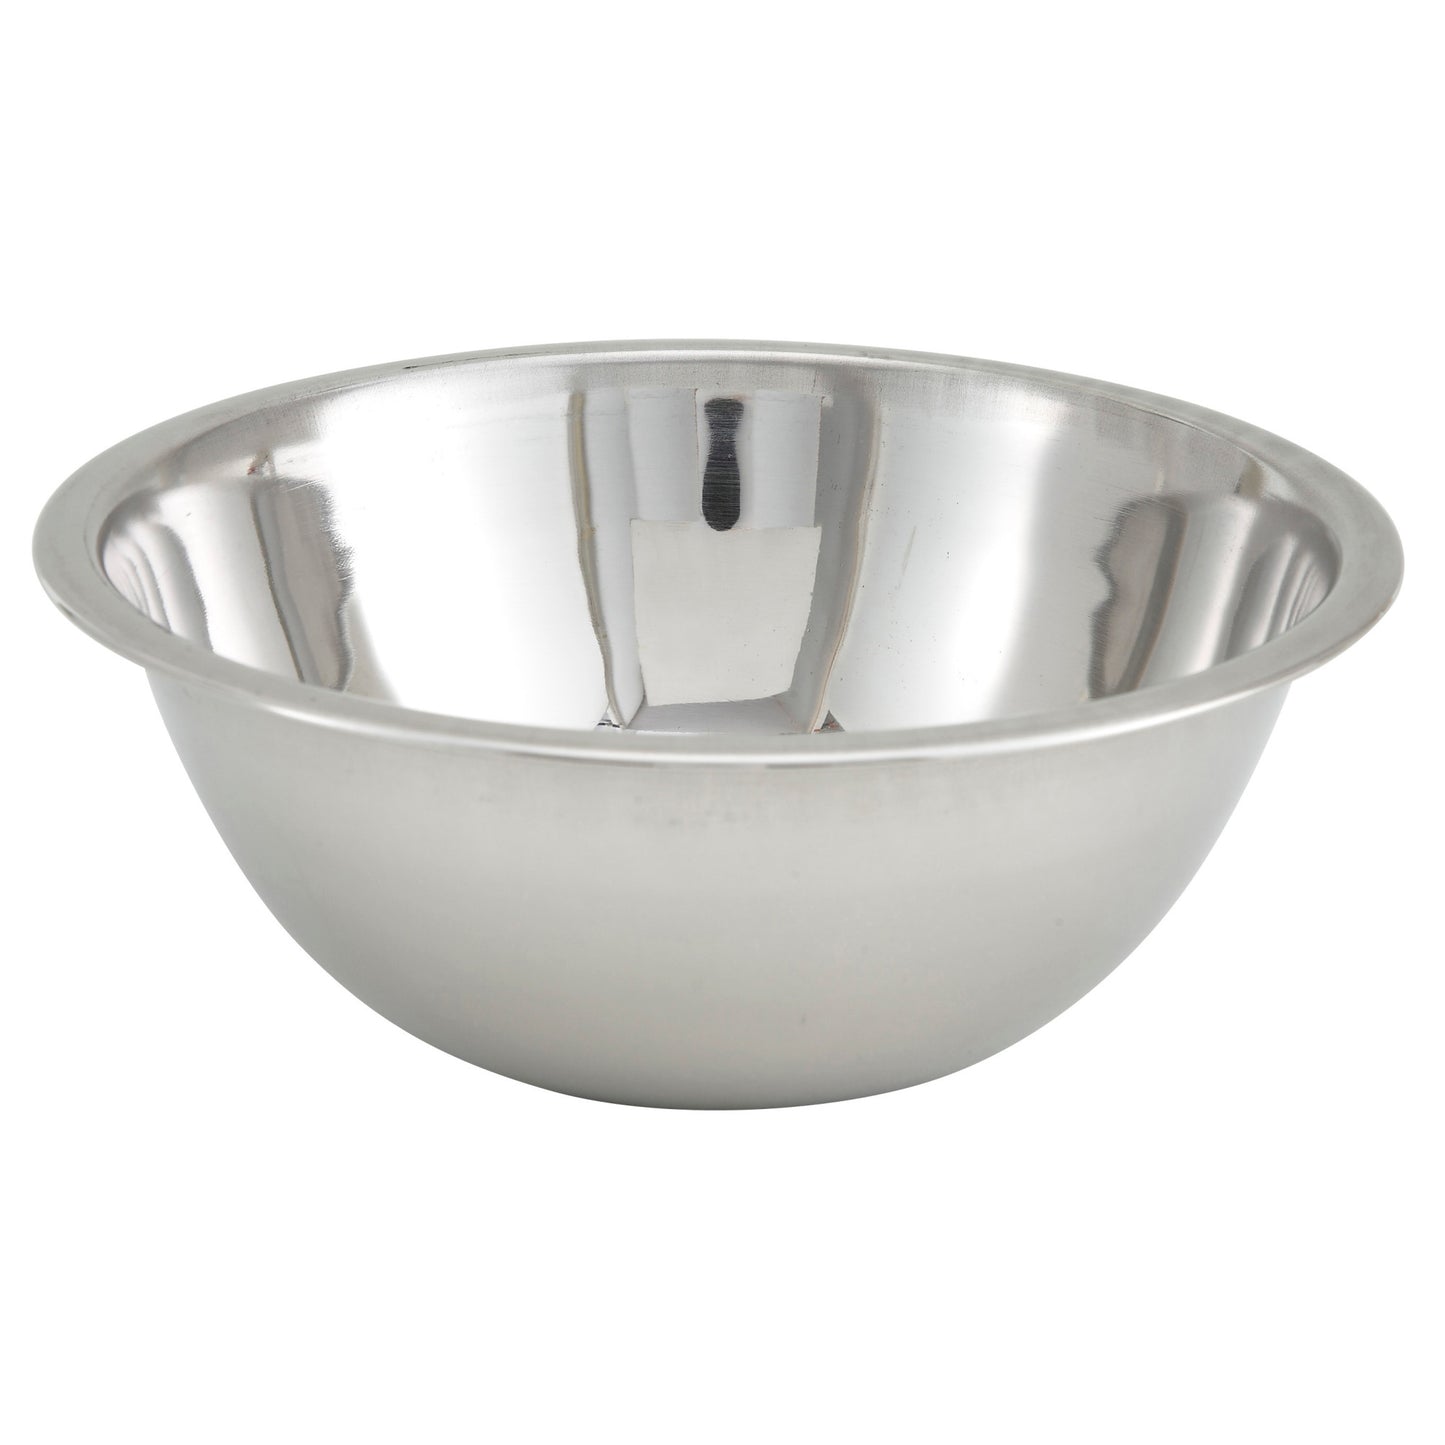 MXBT-150Q - All-Purpose True Capacity Mixing Bowl, Stainless Steel - 1-1/2 Quart